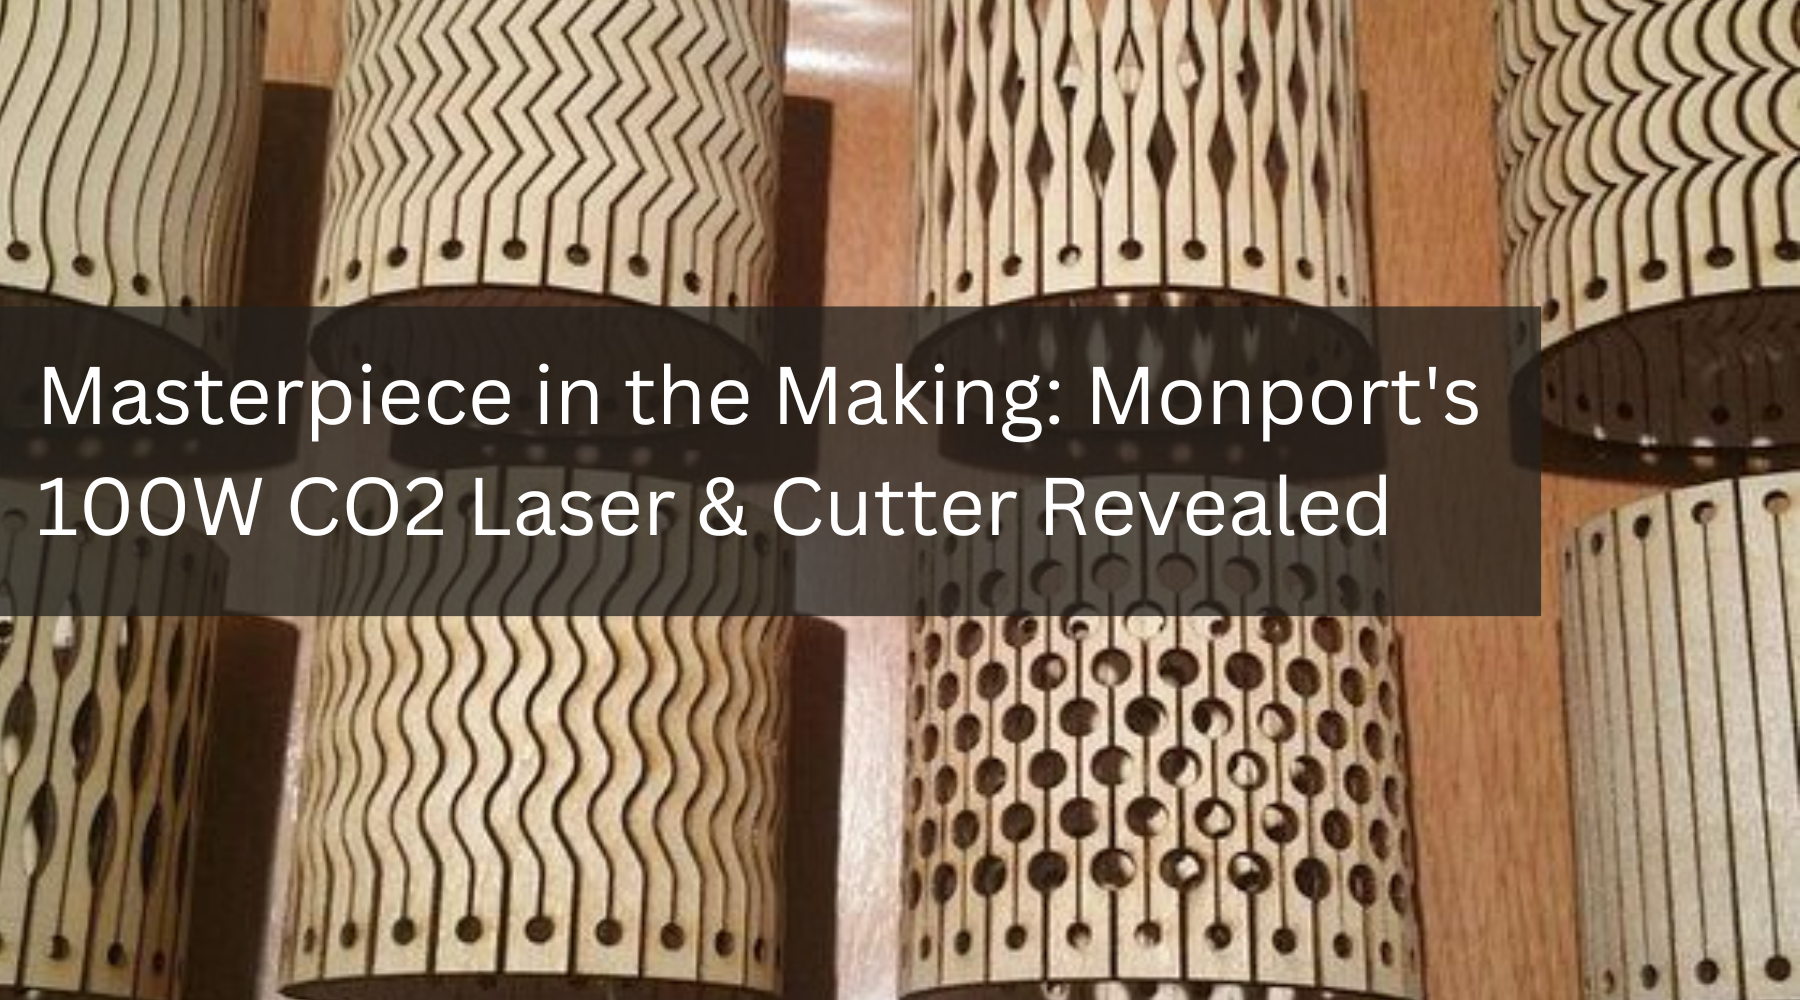 Masterpiece in the Making: Monport's 100W CO2 Laser & Cutter Revealed